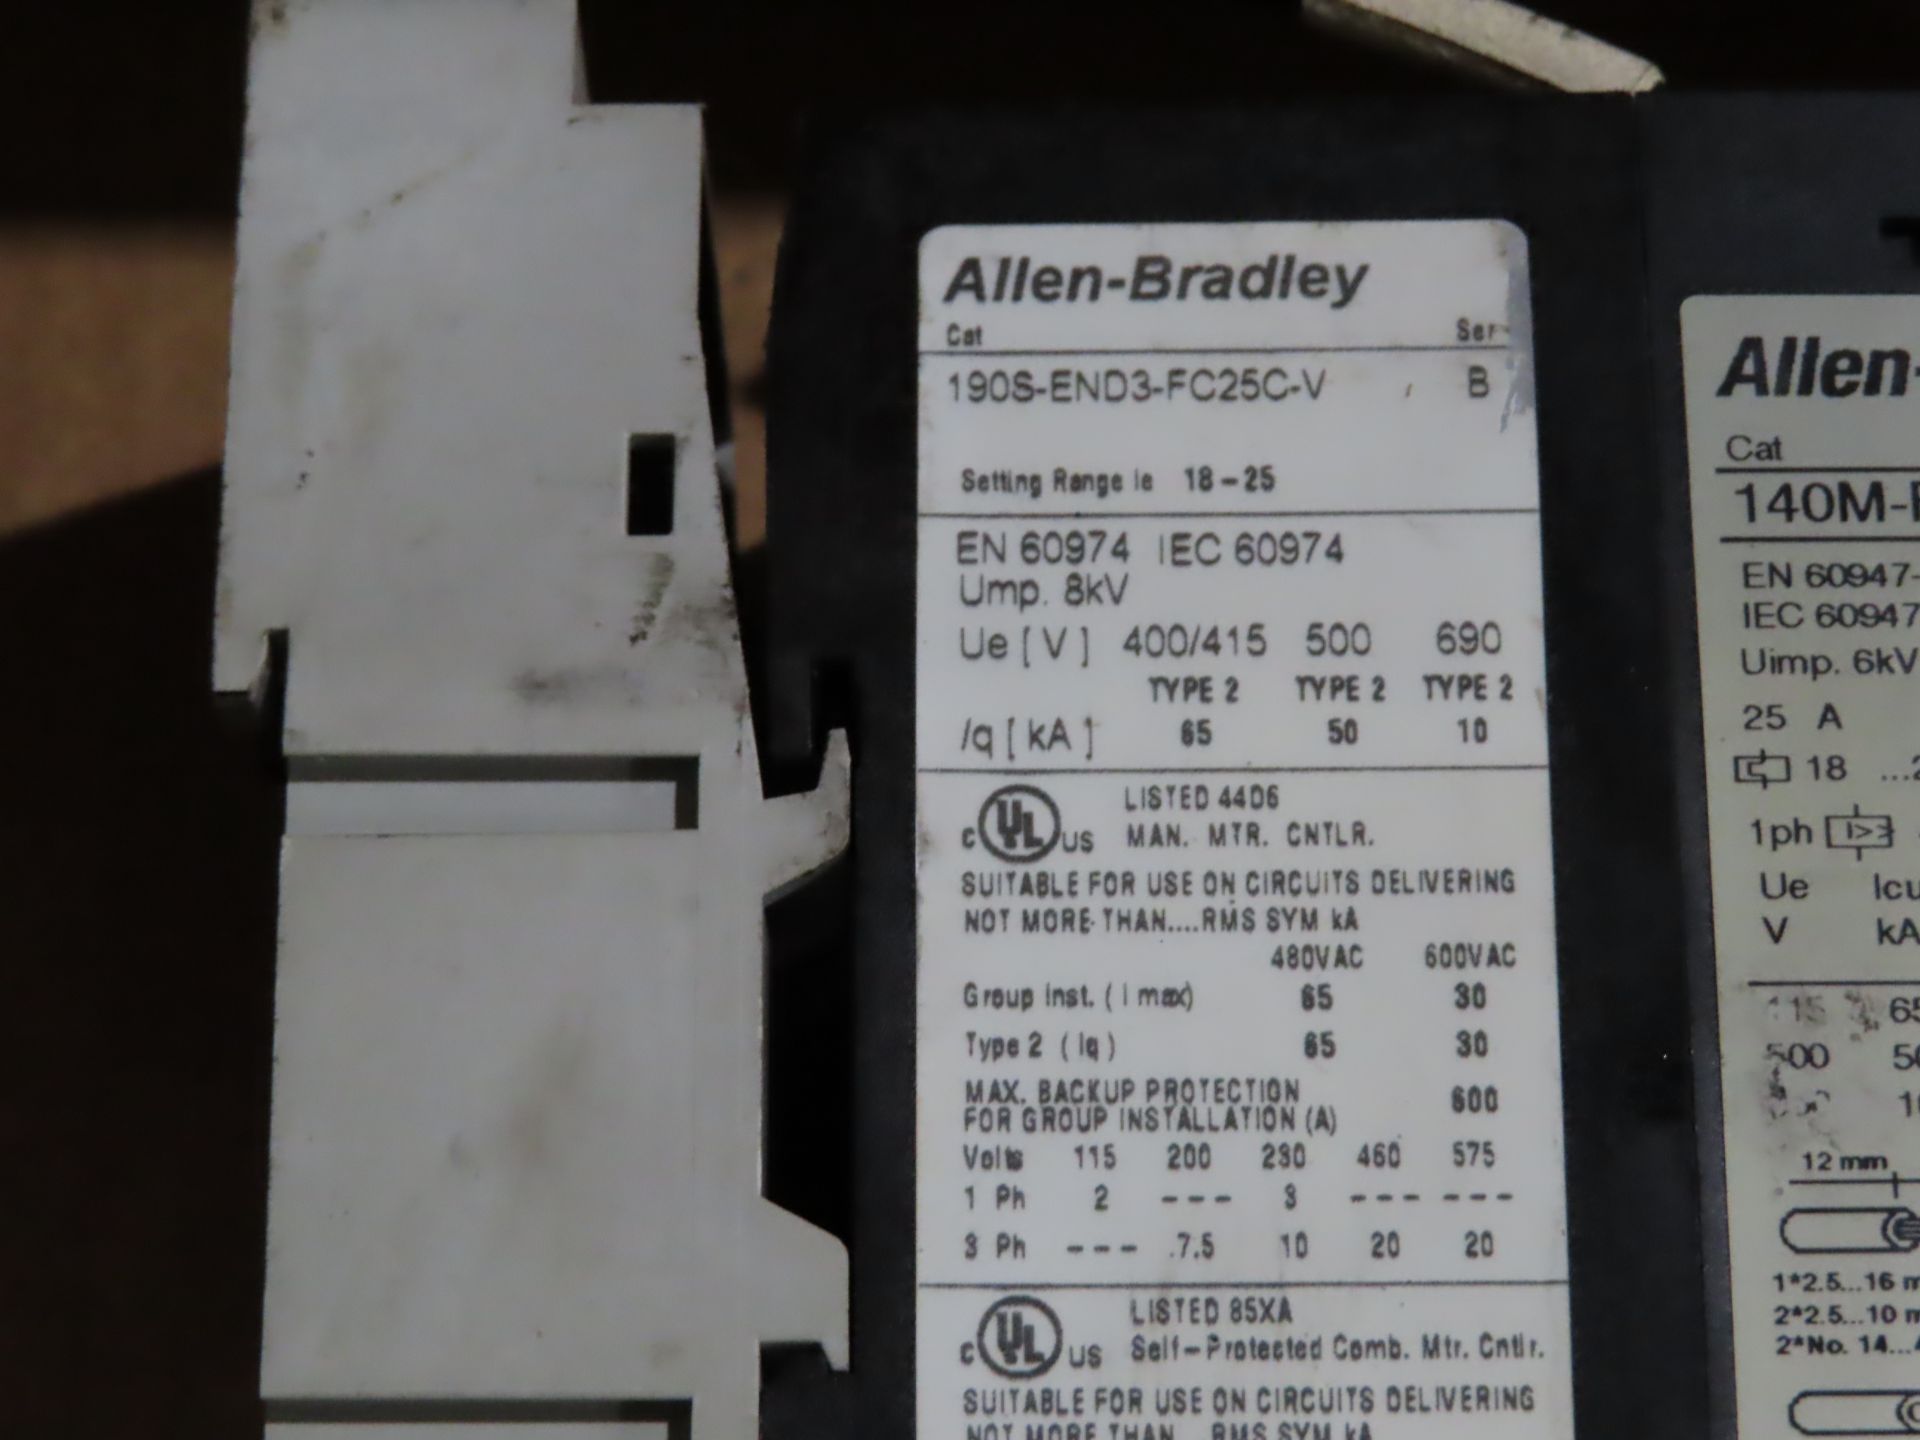 Qty 2 Allen Bradley model 190S-END3-FC25C-V, used parts crib spares, as always with Brolyn LLC - Image 2 of 2